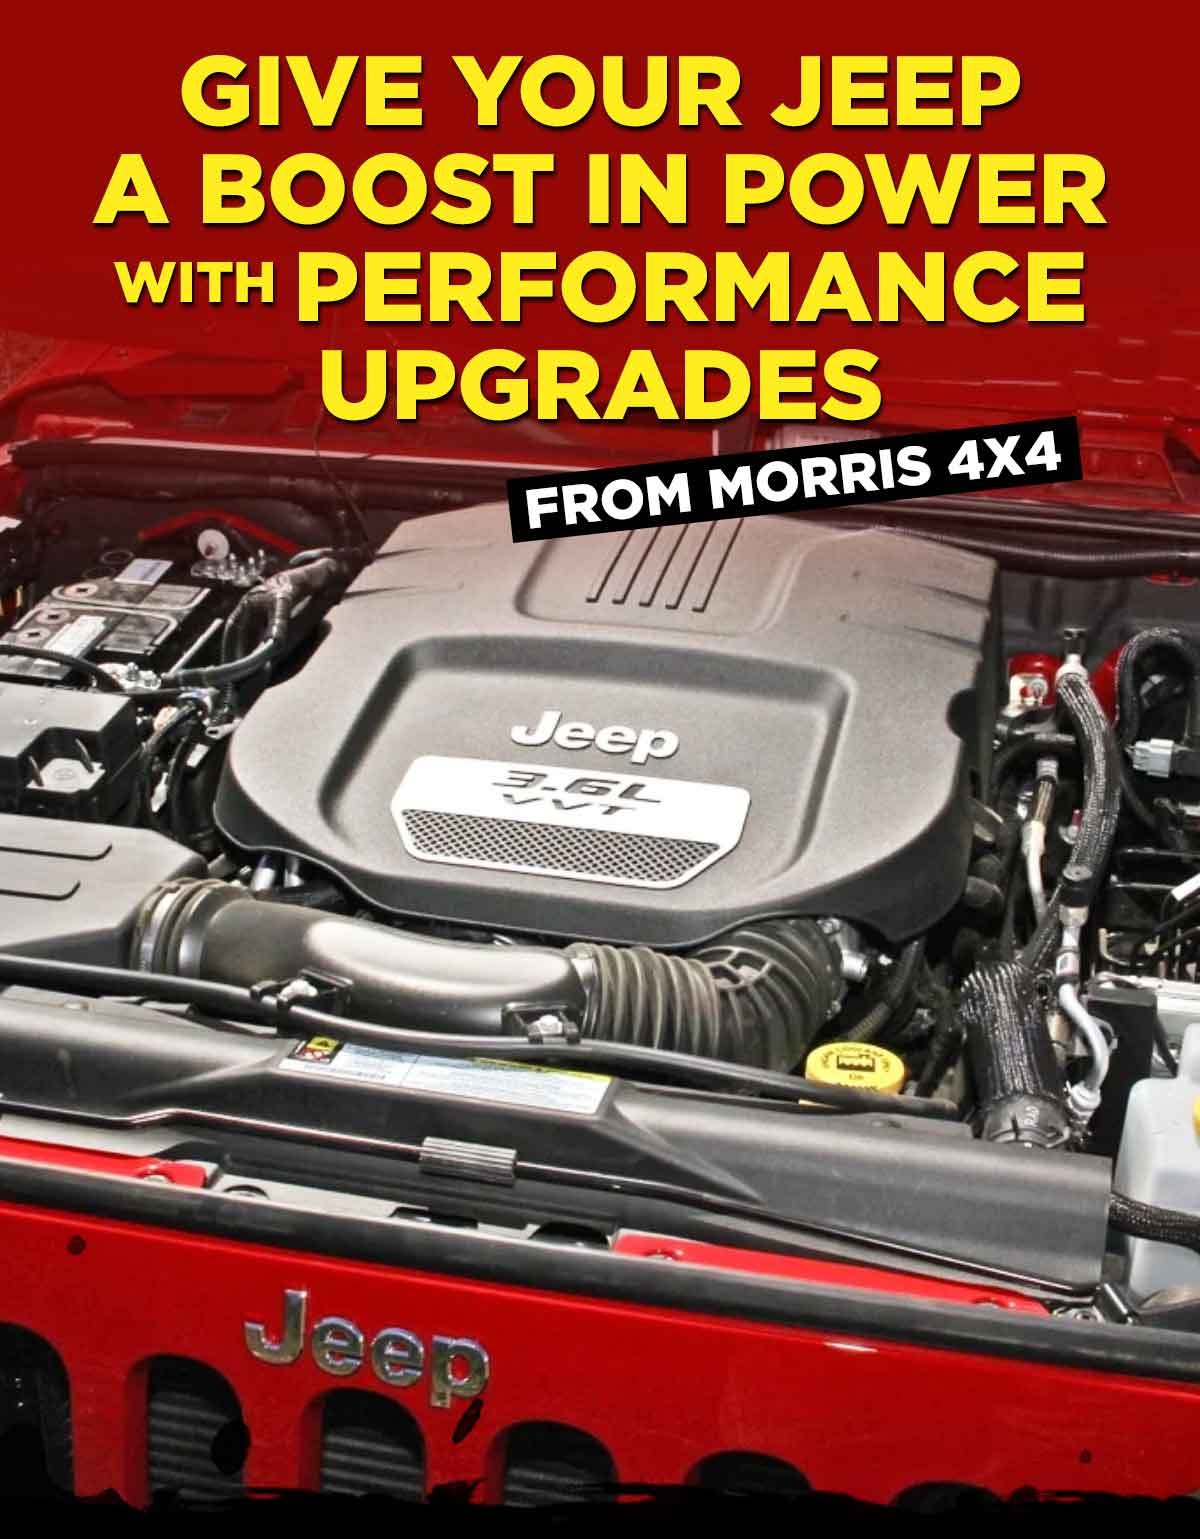 Give Your Jeep A Boost In Power With Performance Upgrades From Morris 4x4